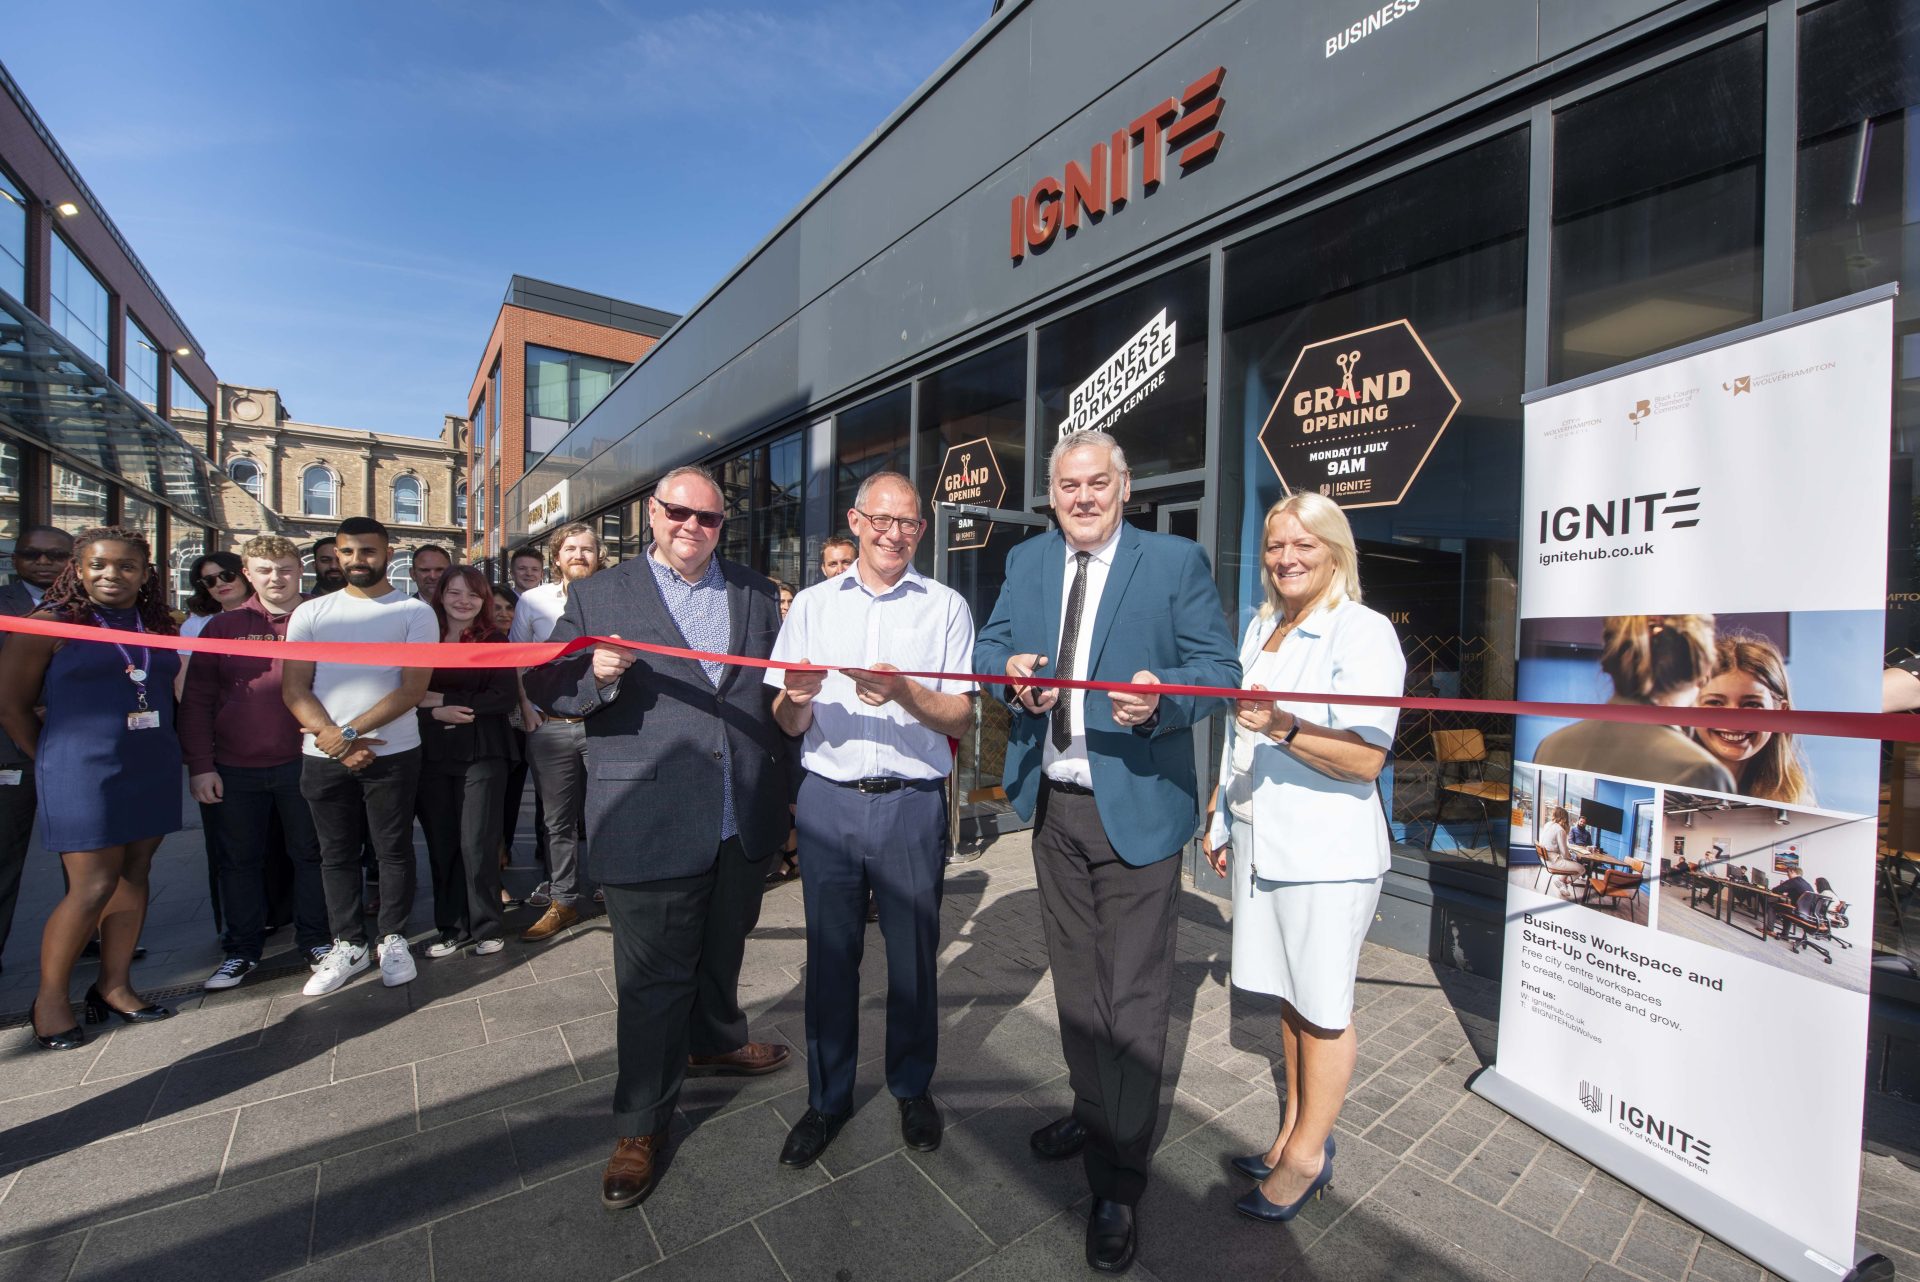 <strong>IGNITE business and enterprise hub opens its doors</strong>